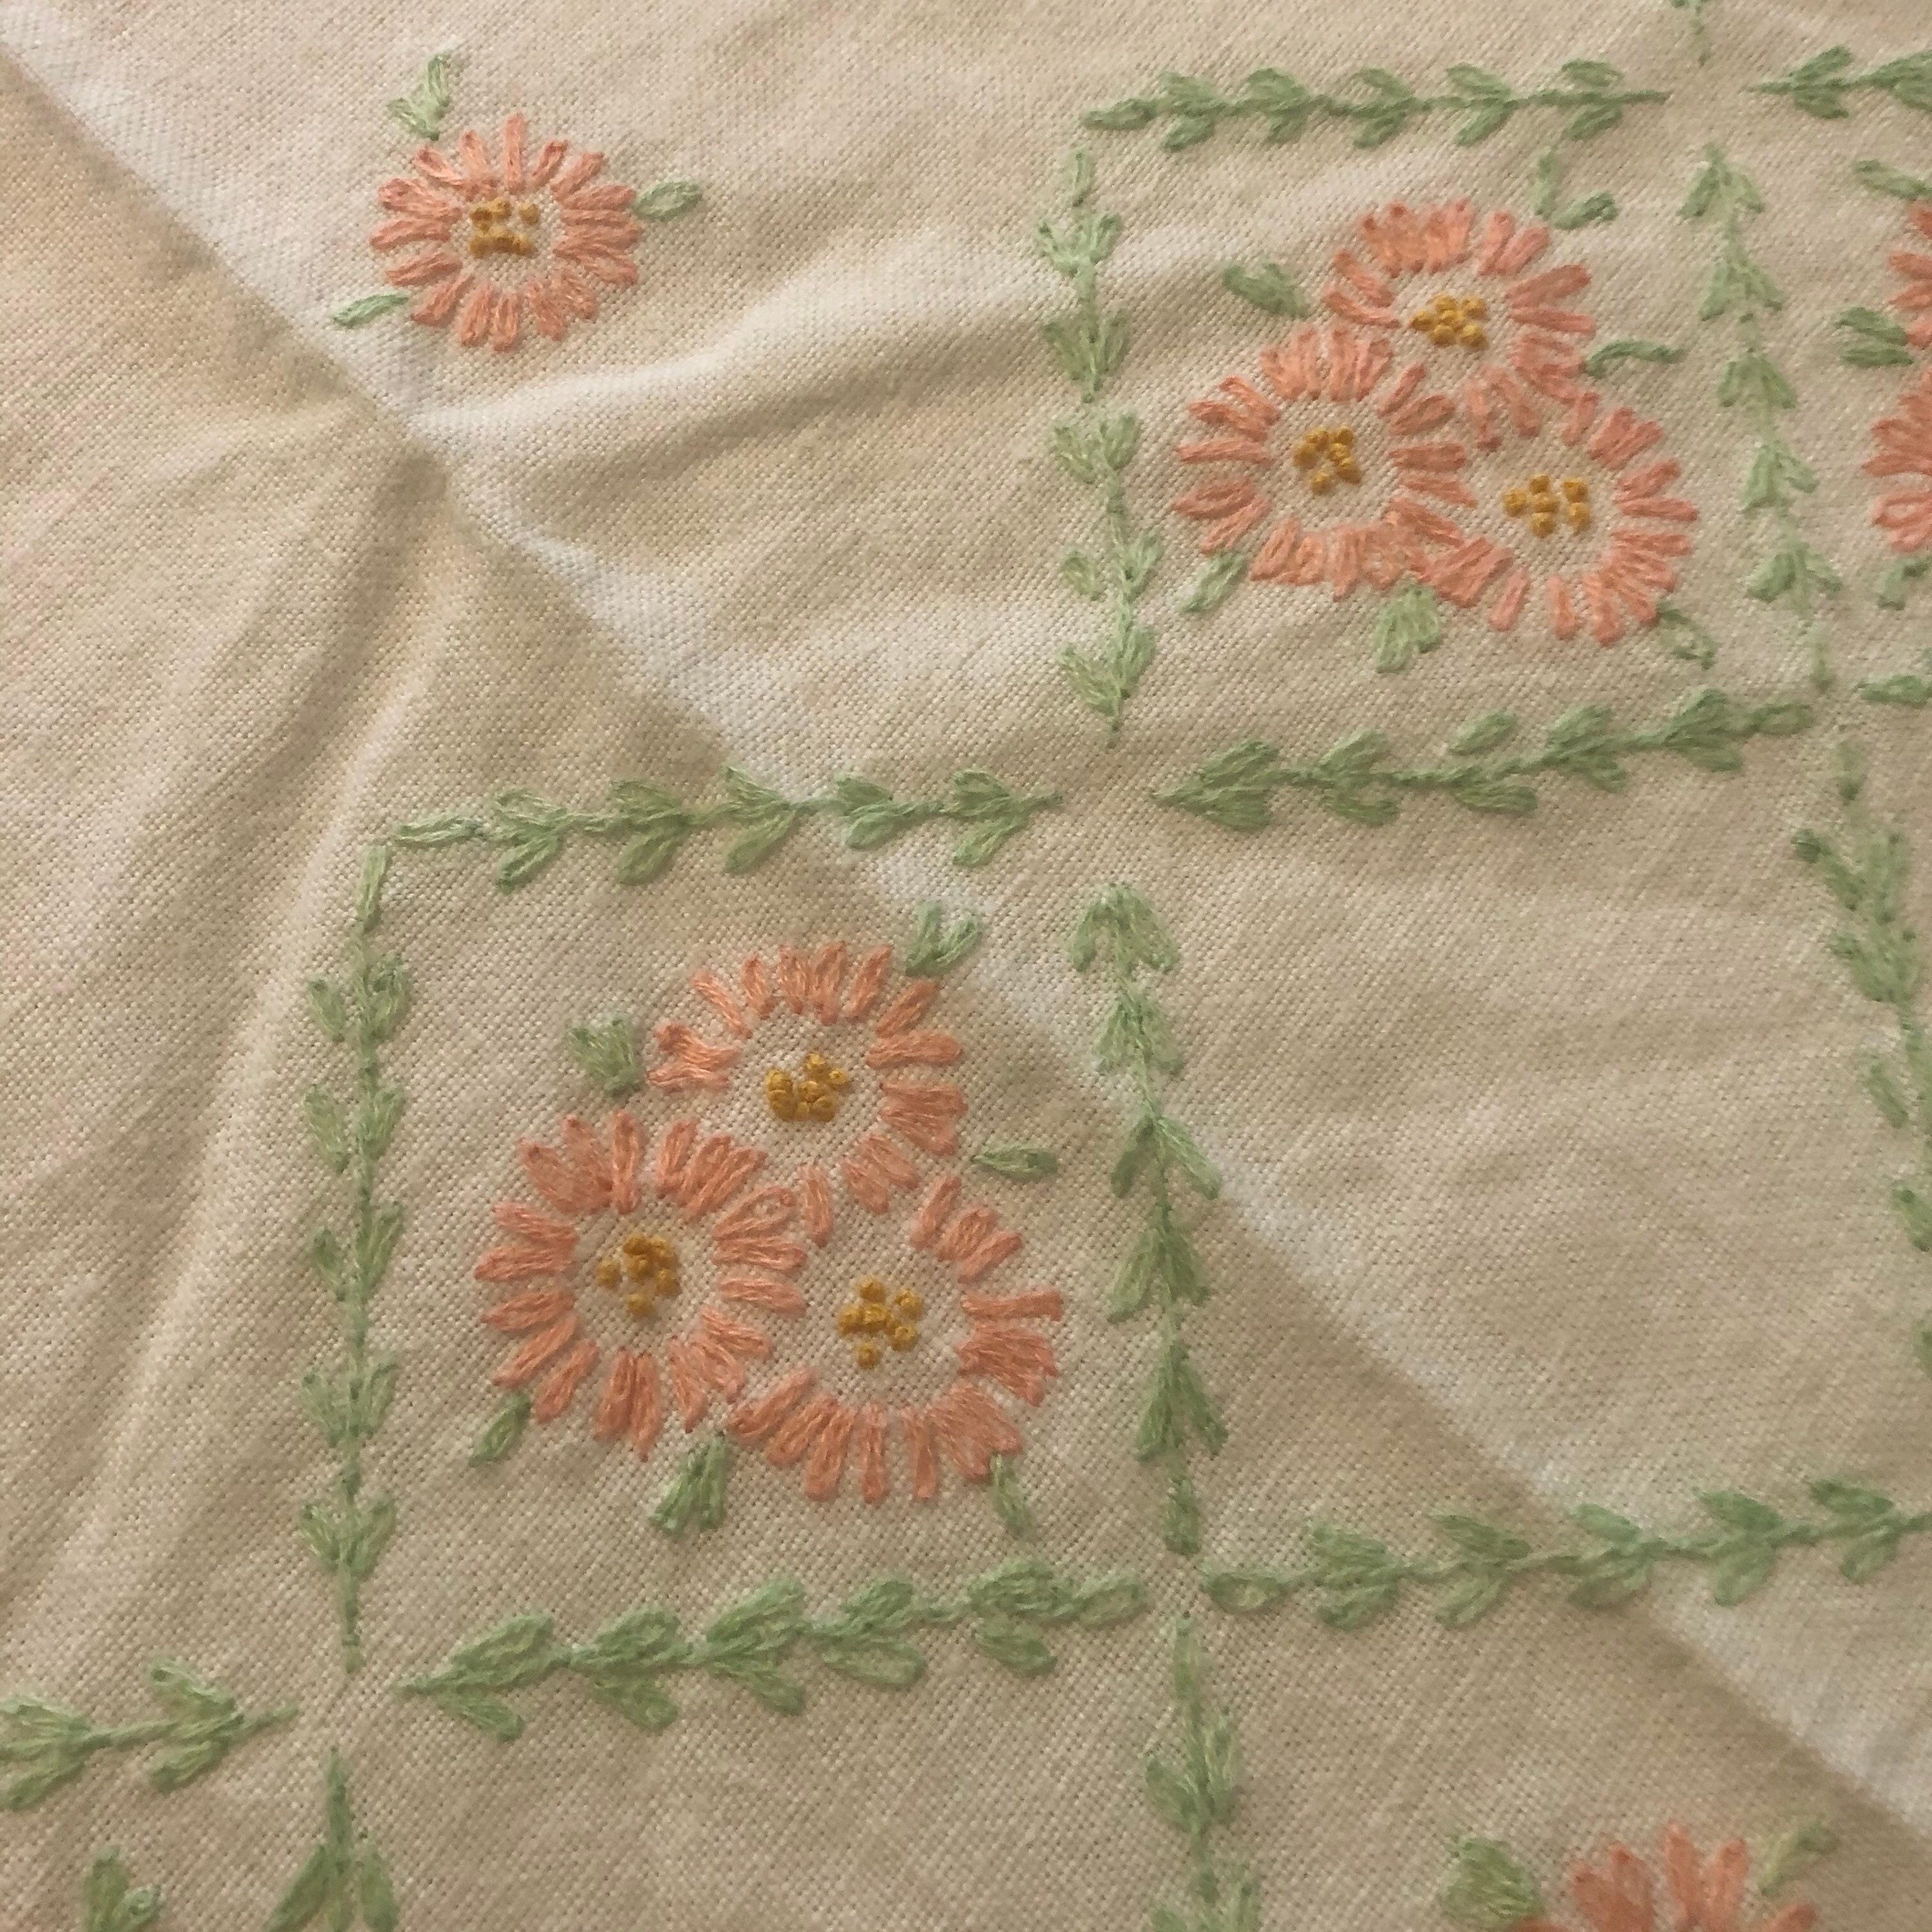 Vintage Hand Embroidered TableclothPeach and Green with beige | Etsy